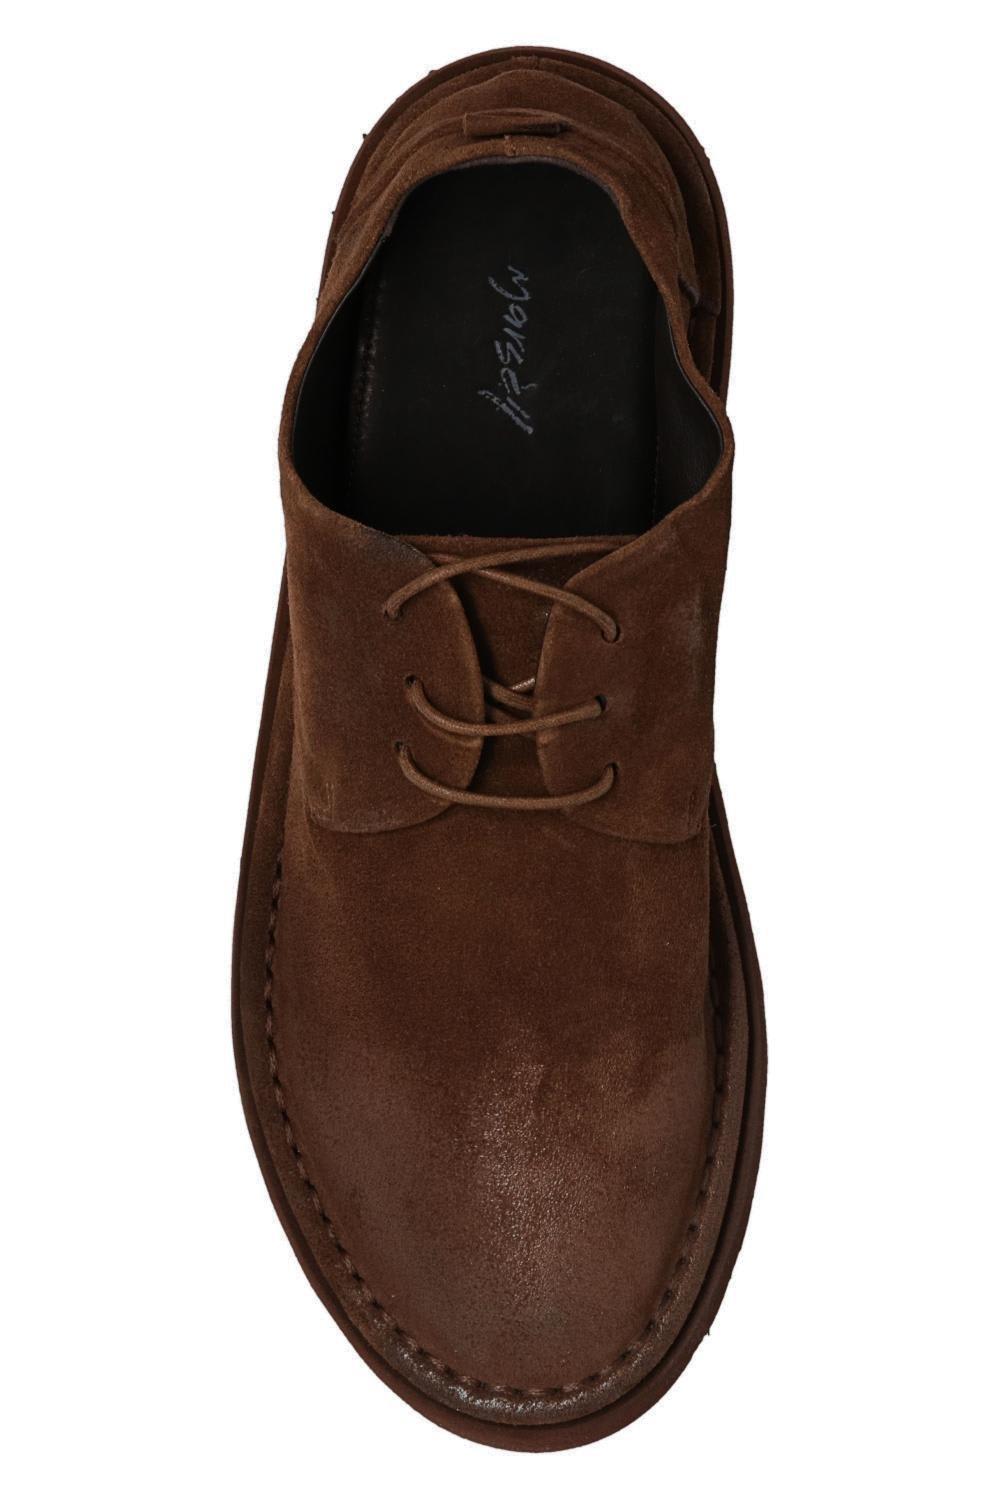 Marsèll Steccoblocco woven-leather Derby shoes - Brown